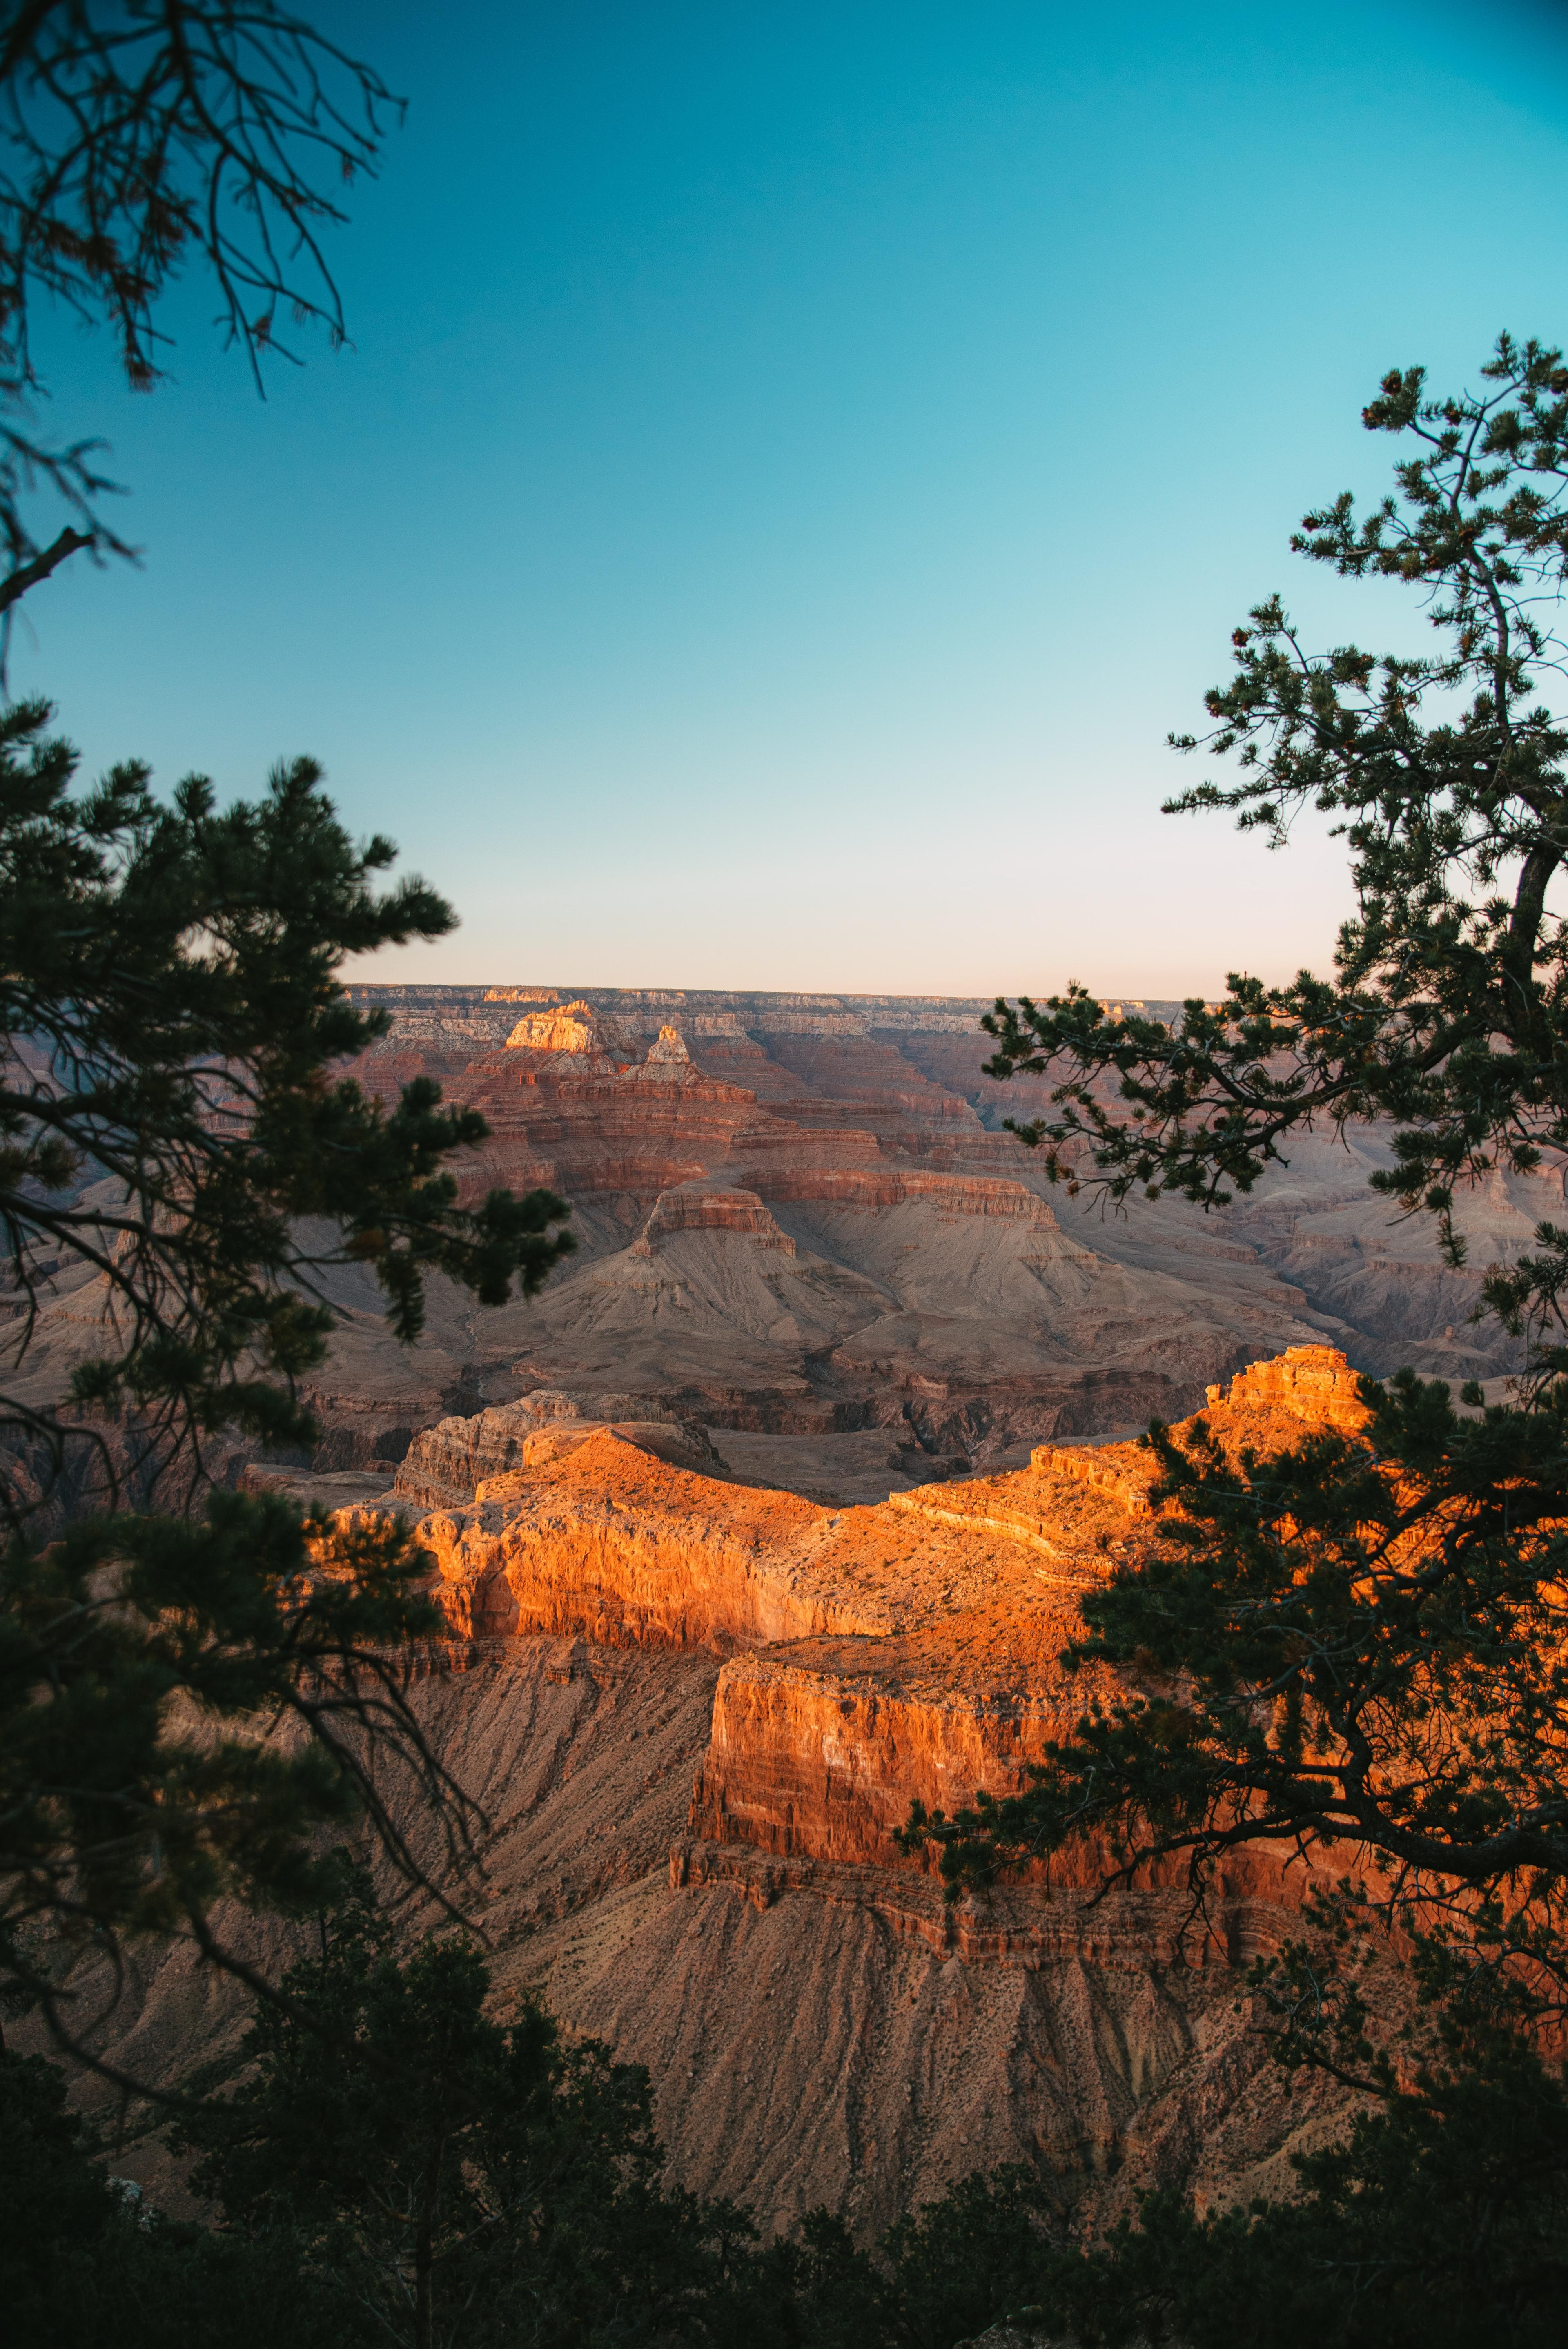 A view of the Grand Canyon through the trees.